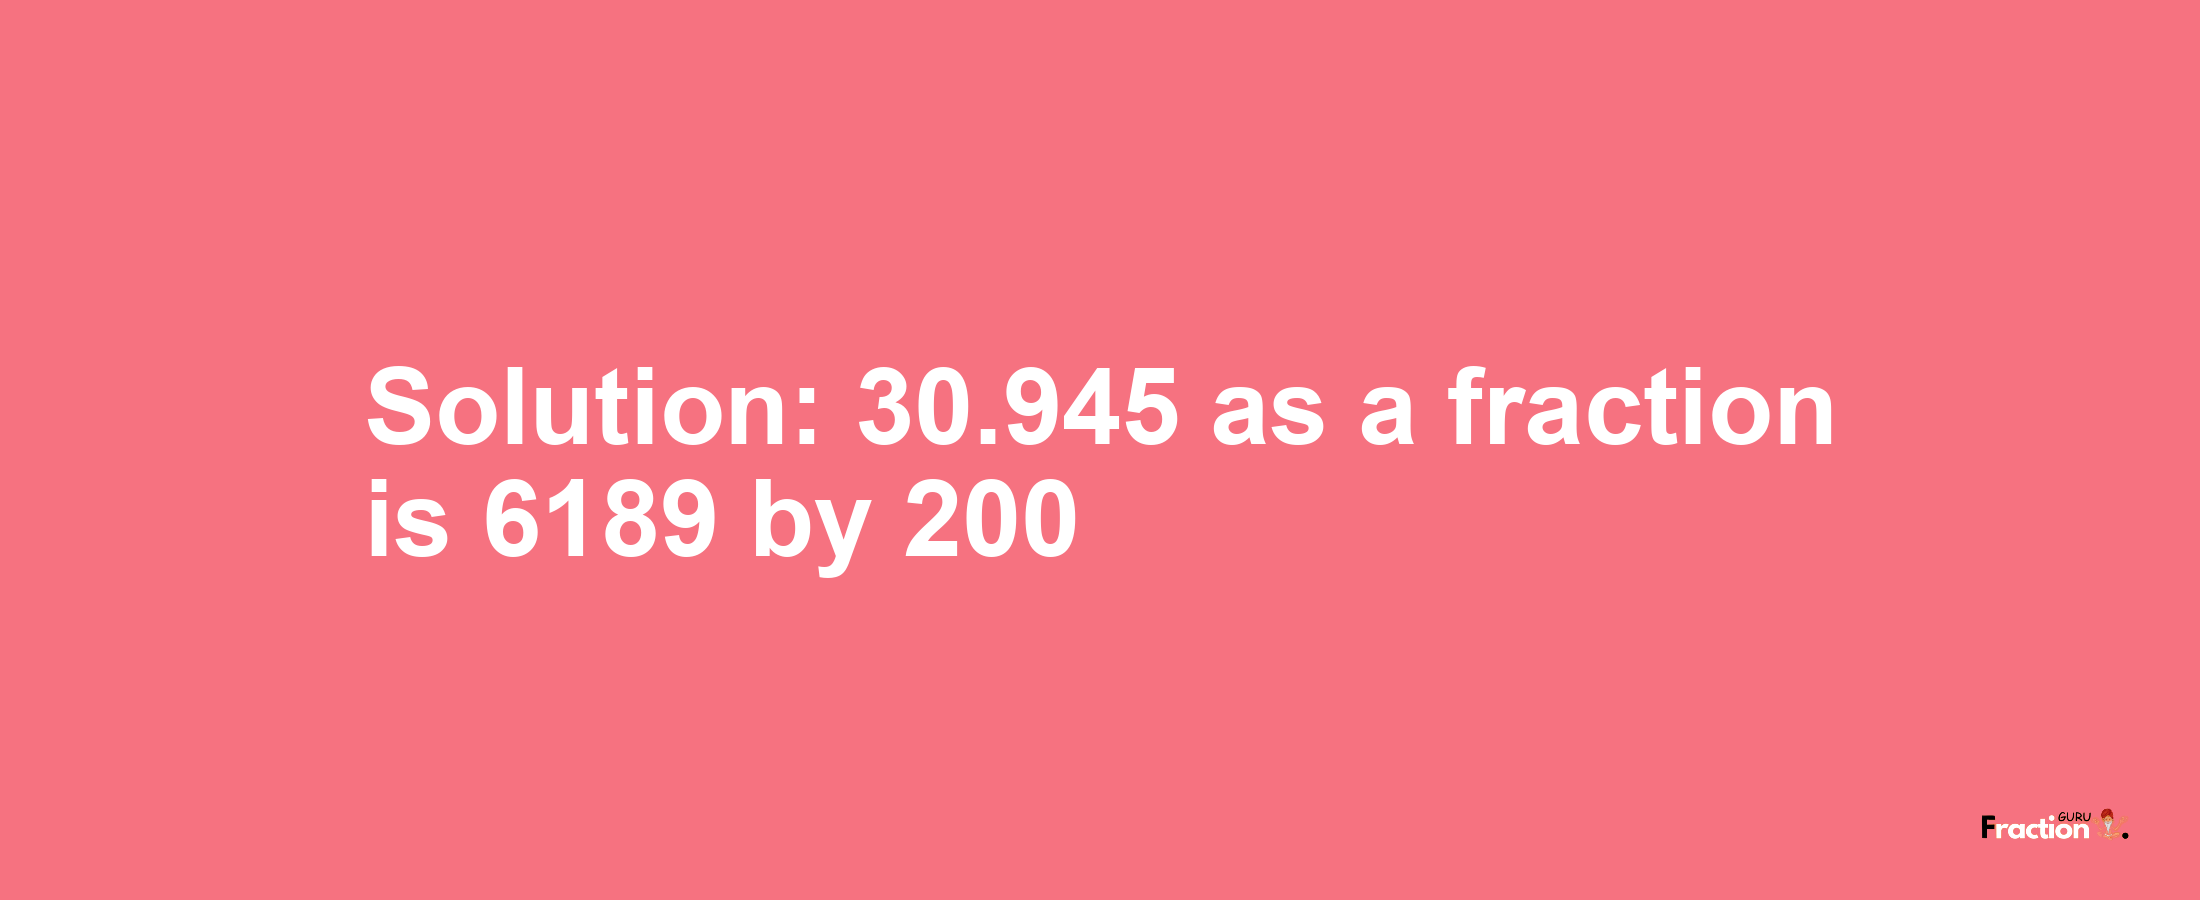 Solution:30.945 as a fraction is 6189/200